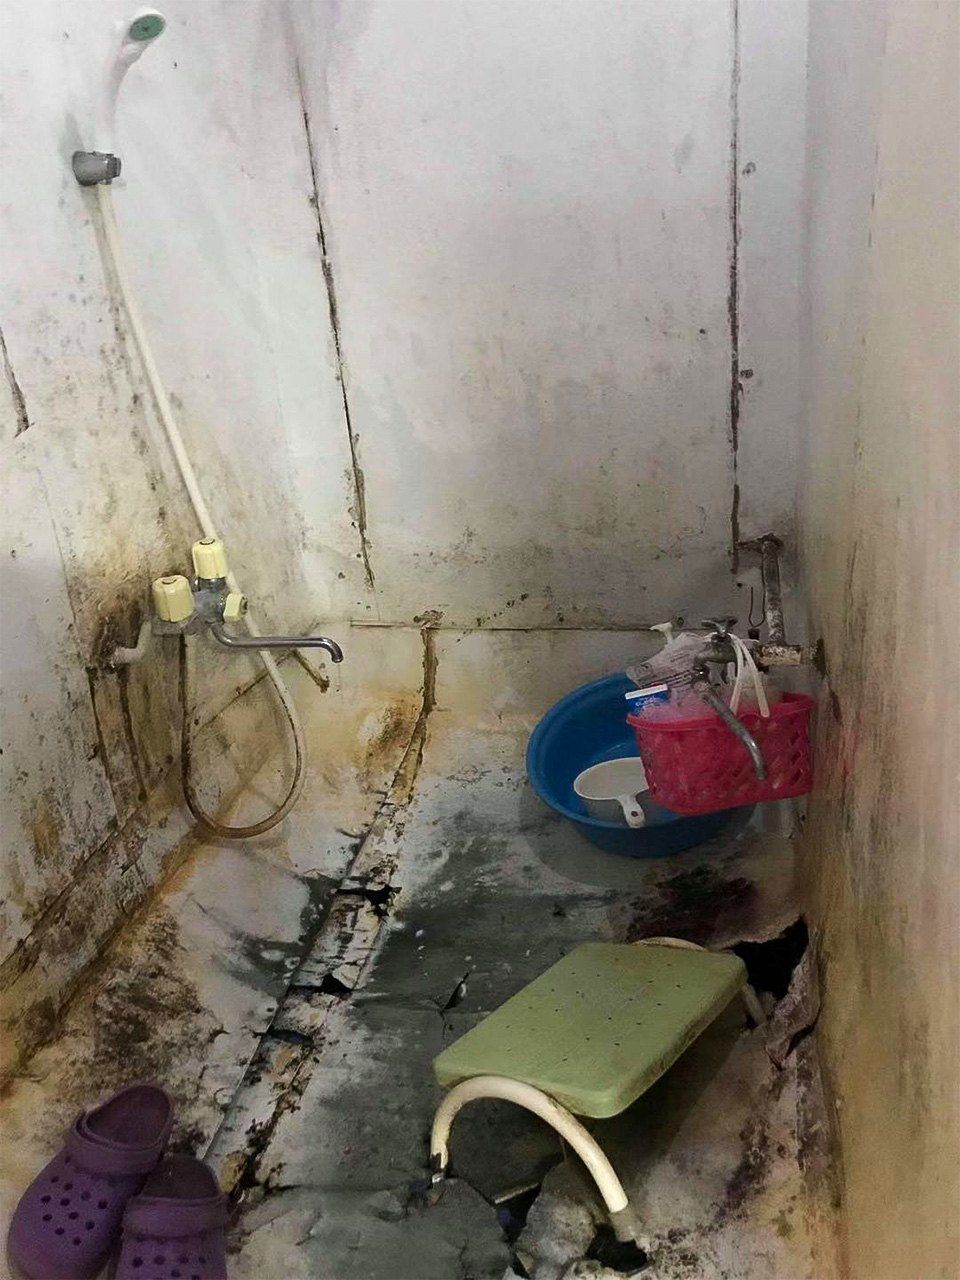 Zhen says technical trainees sometimes endure dangerous or dirty conditions, such as this squalid shower in living quarters for interns from Cambodia.